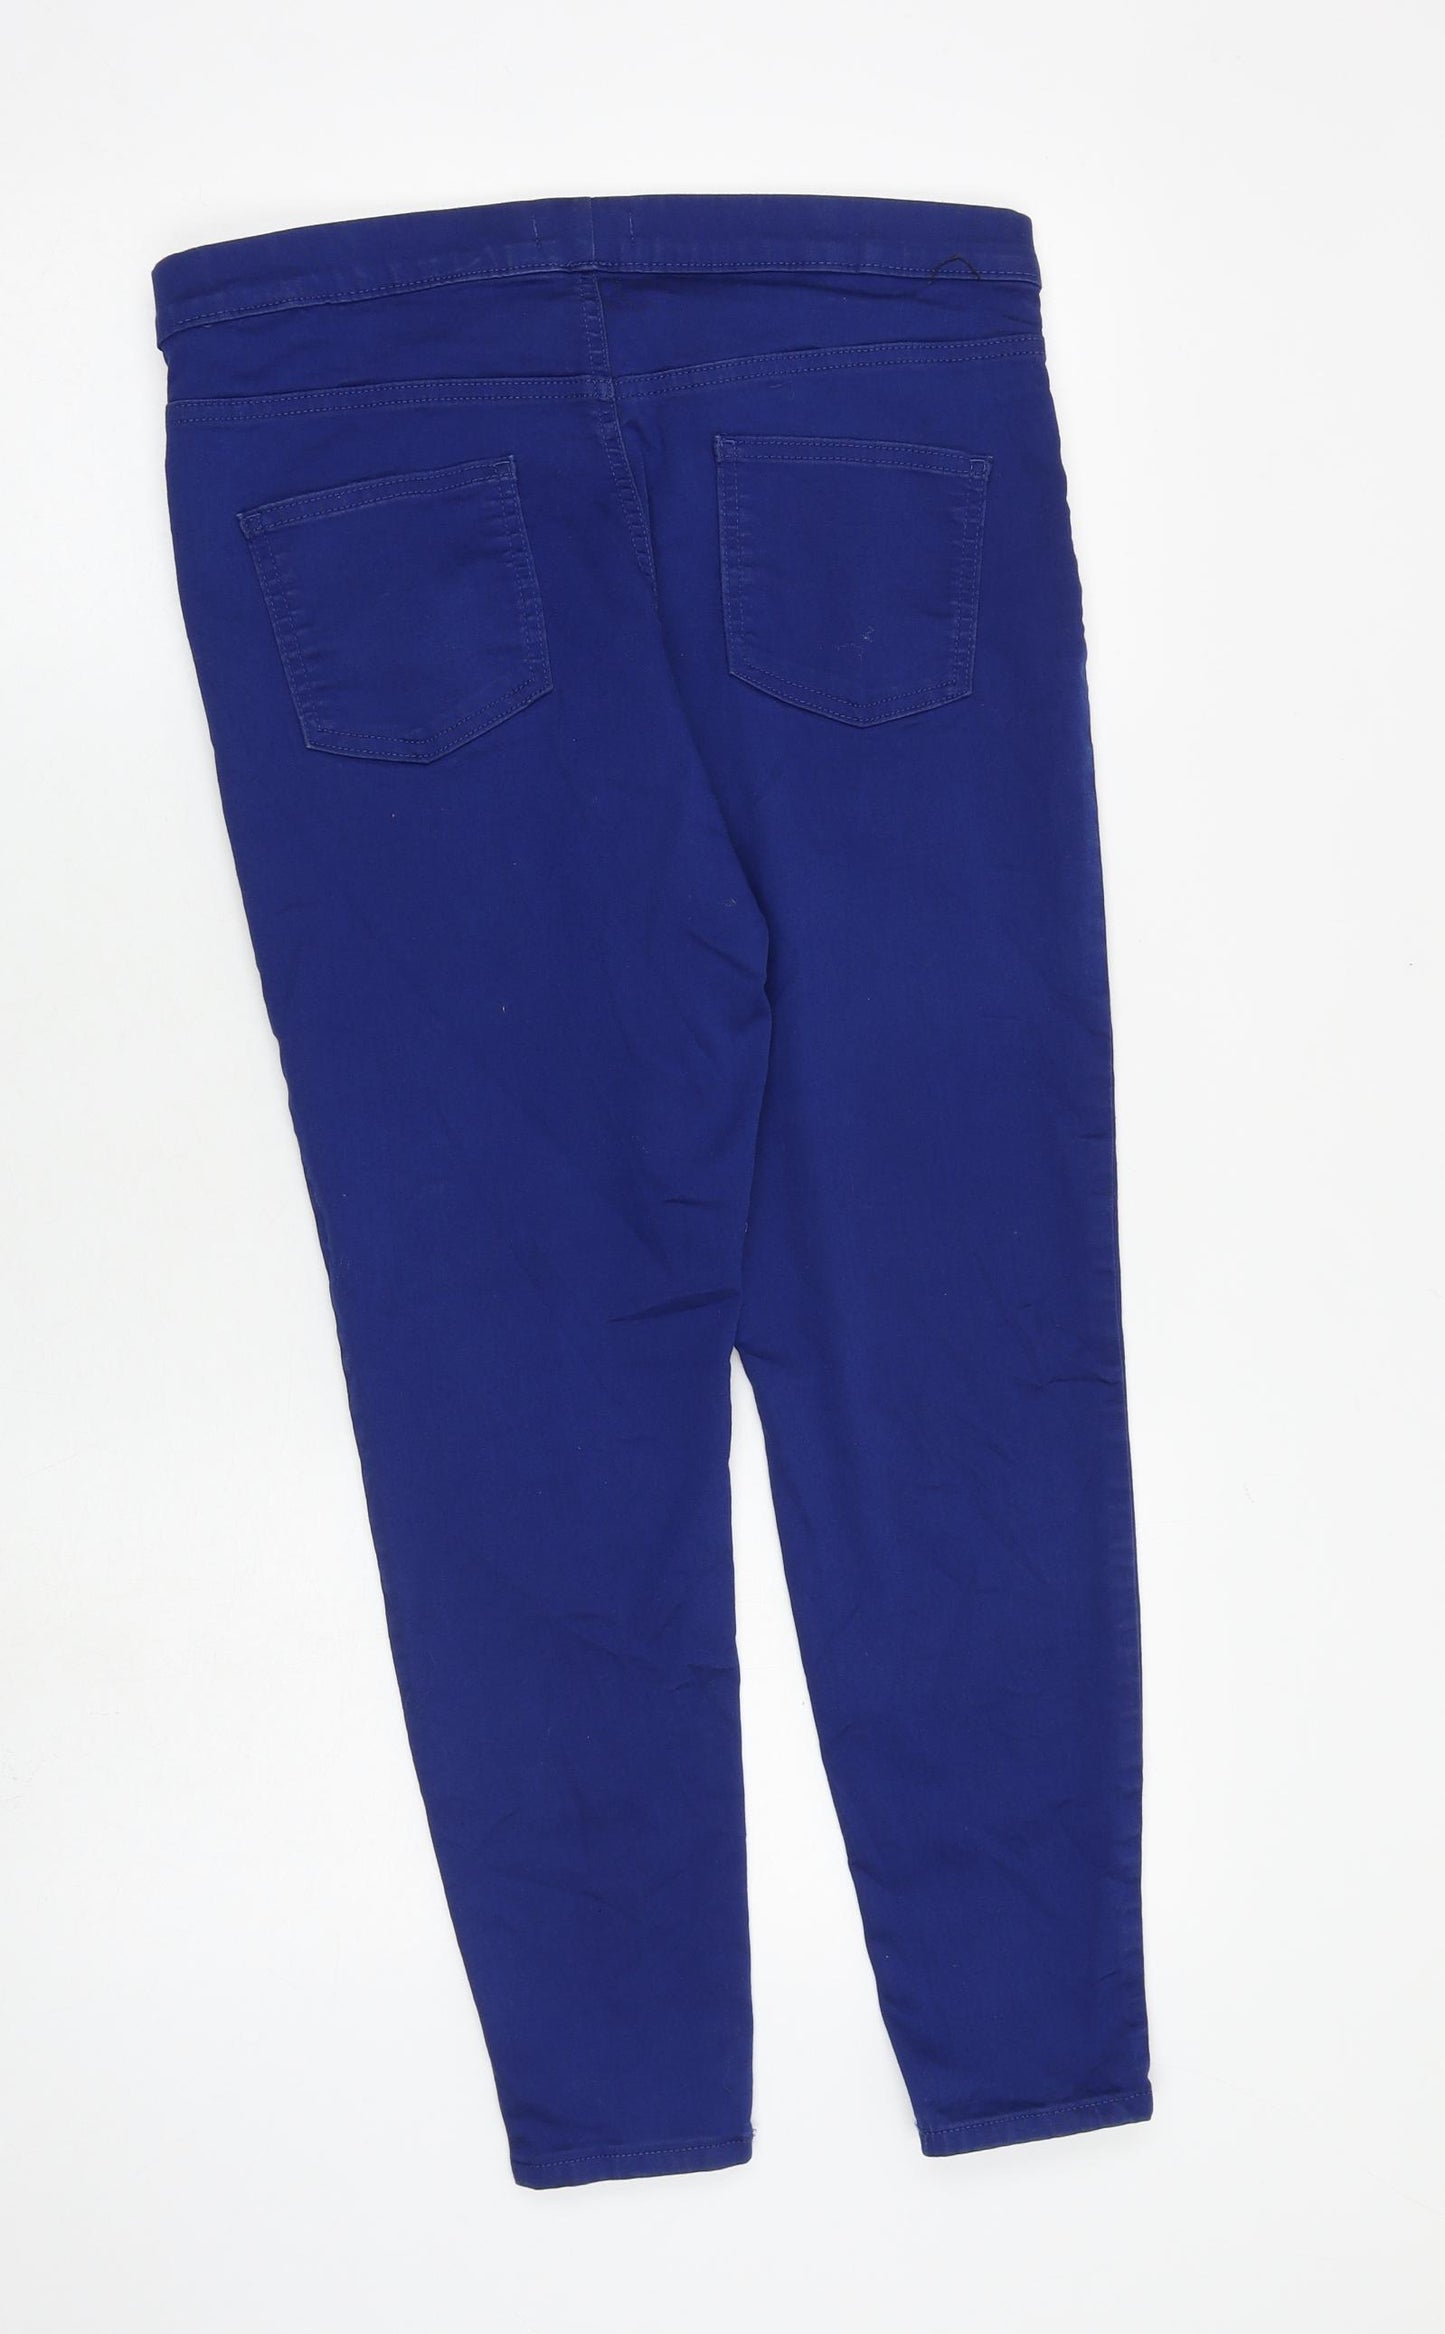 Marks and Spencer Womens Blue Cotton Jegging Jeans Size 16 L26 in Regular